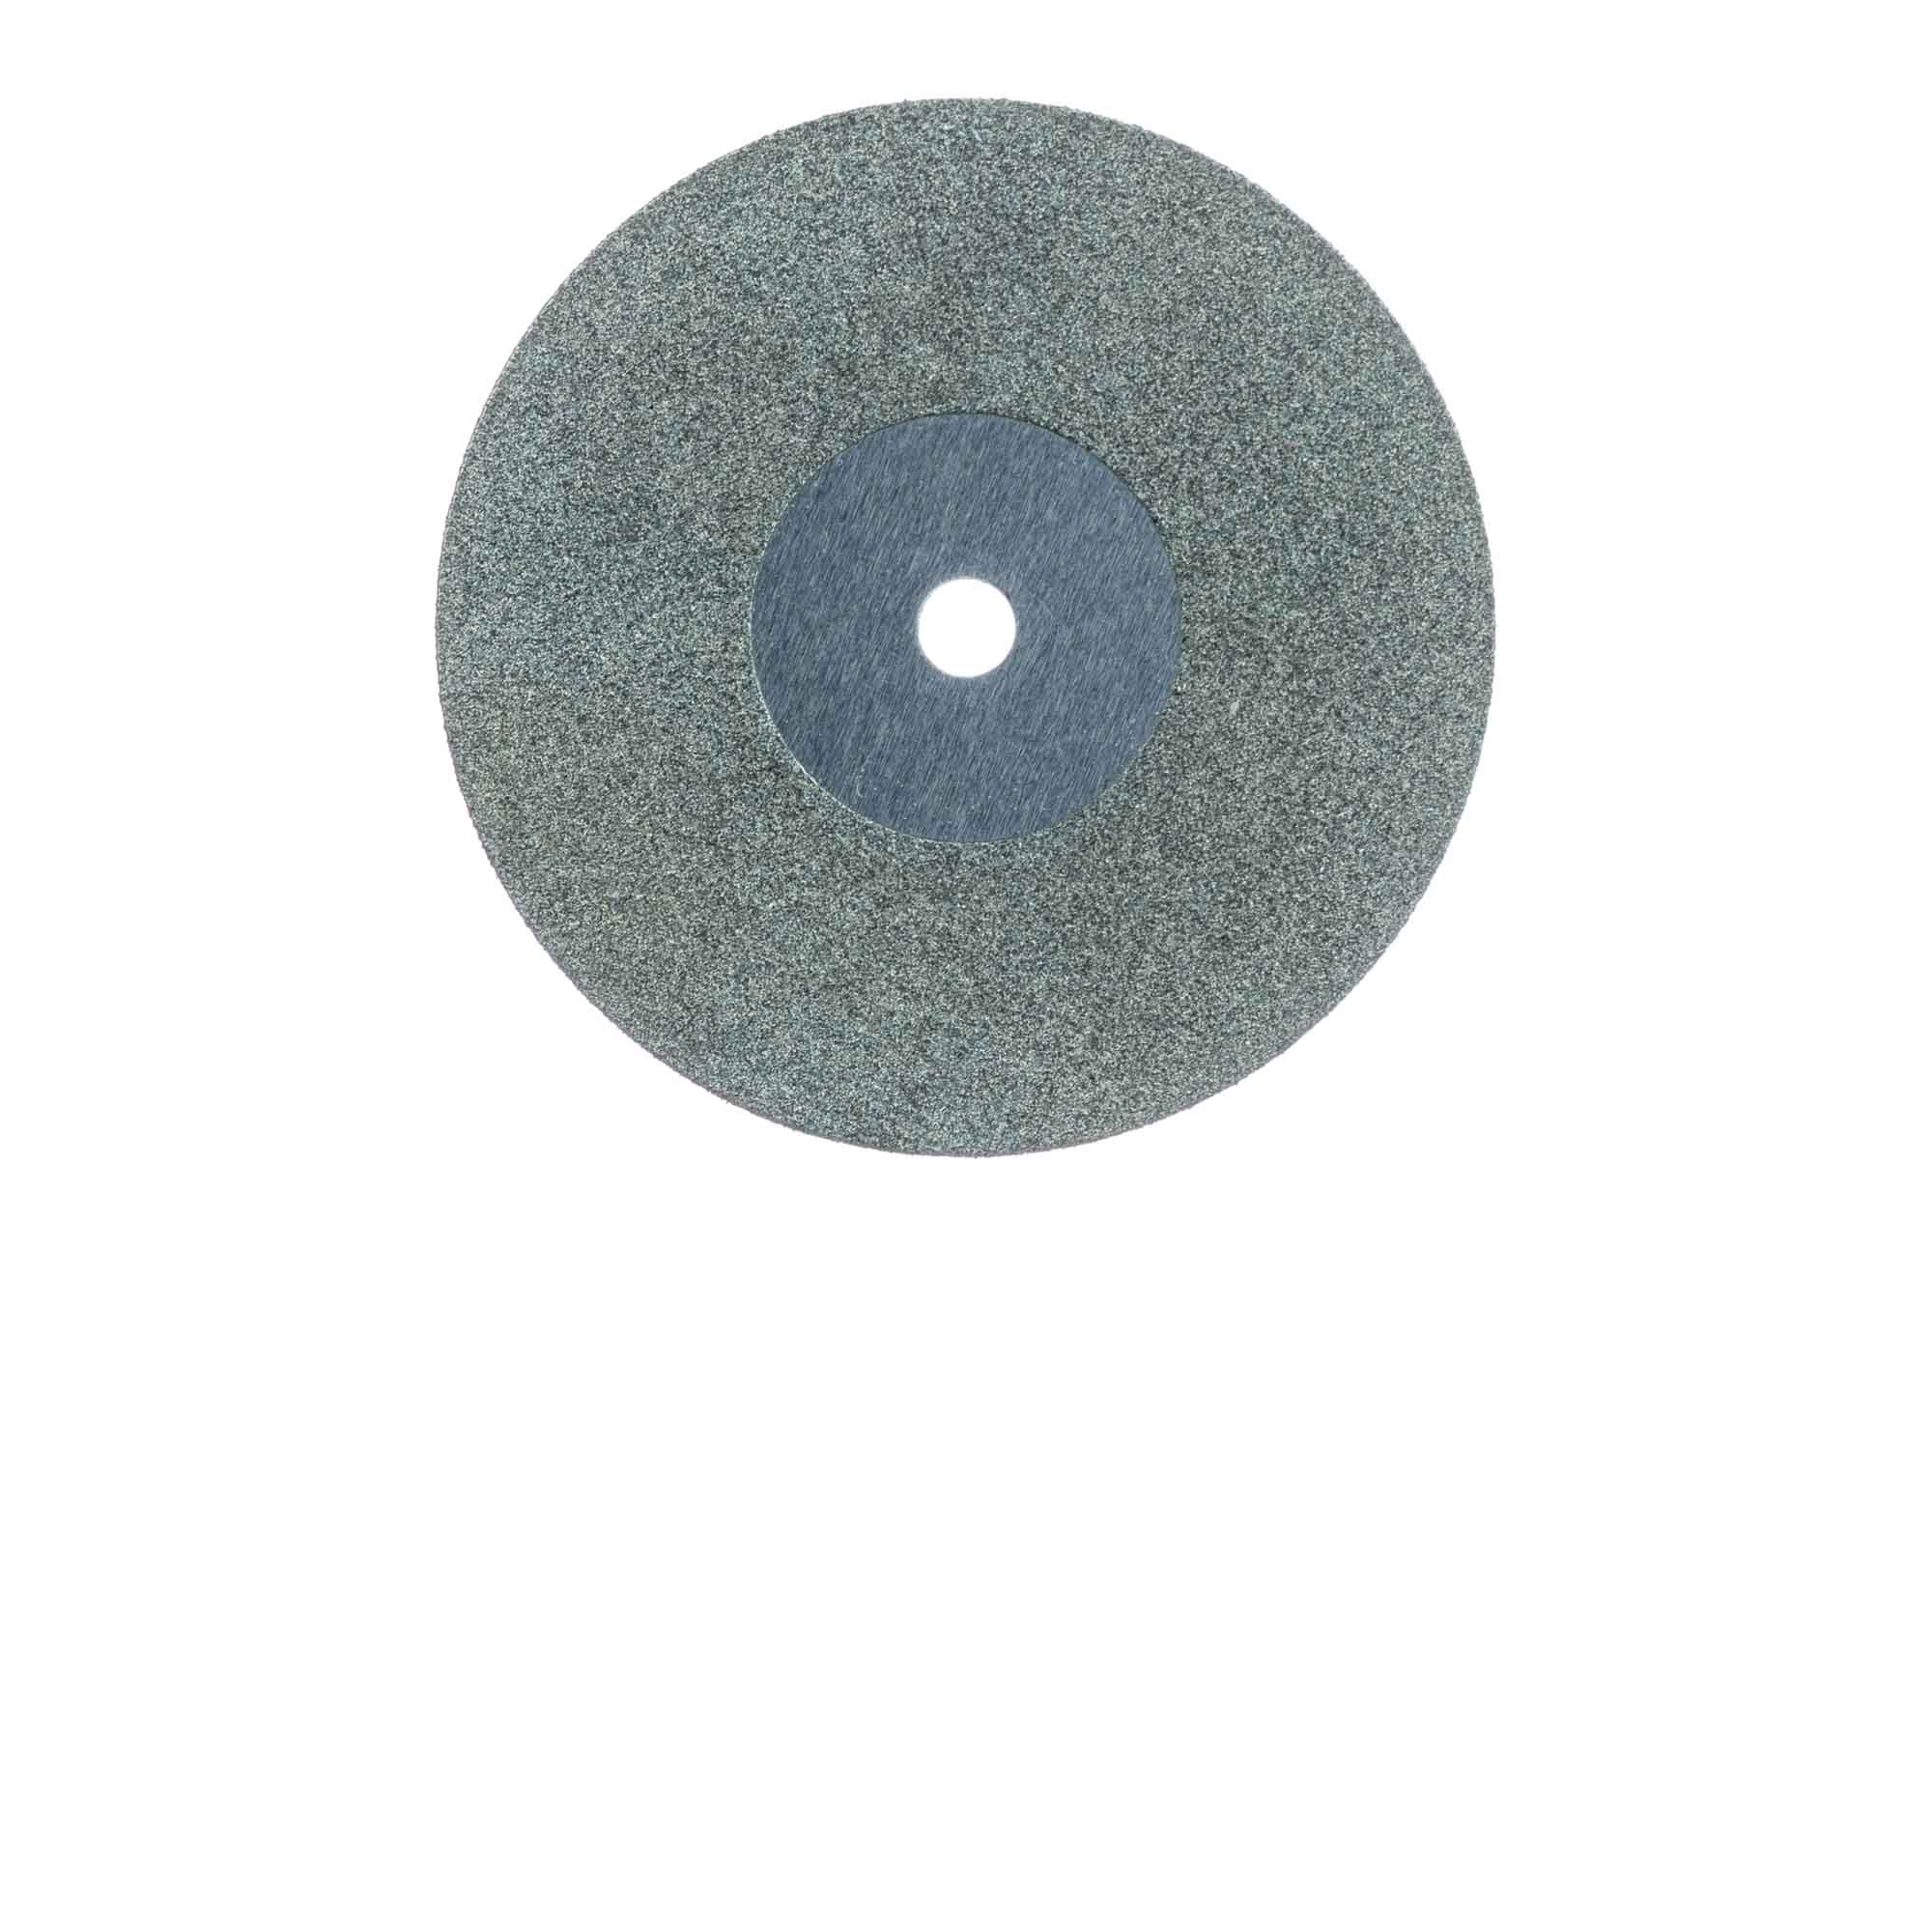 930DF-190-UNM Diamond Disc, Double Sided, 0.25mm Thick, 19mm Ø, Fine, UNM